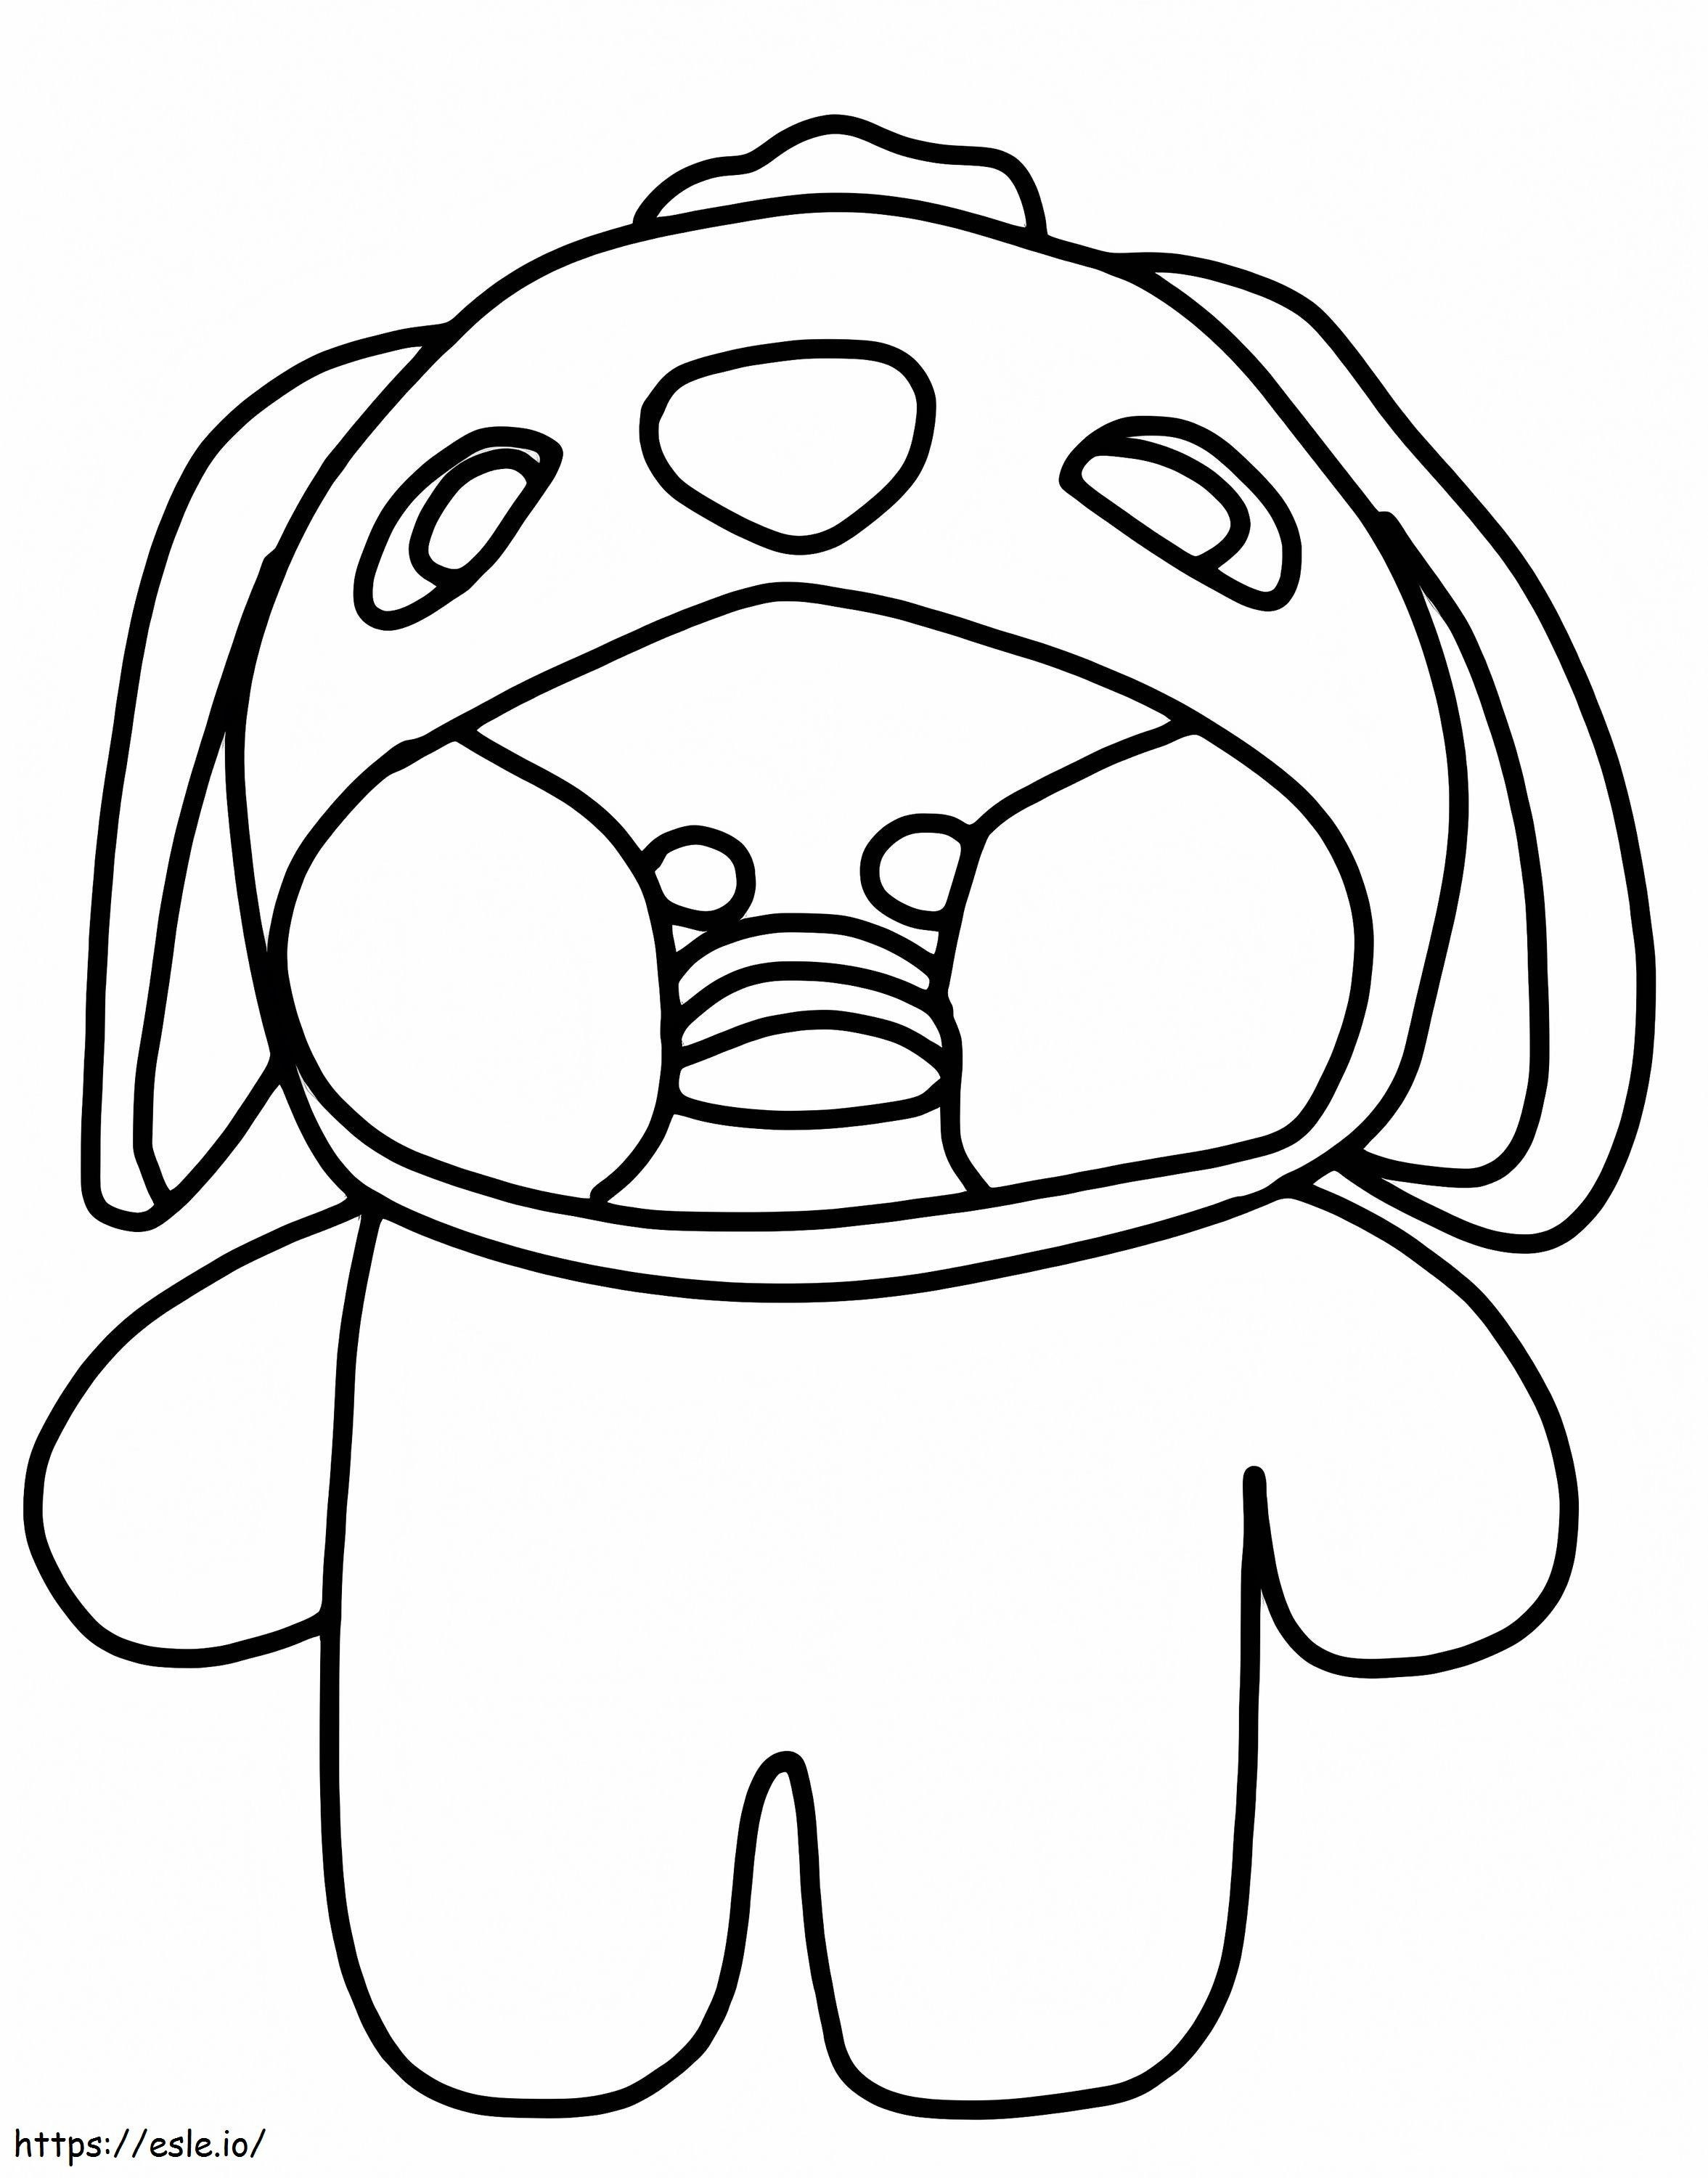 Funny Lalafanfan coloring page